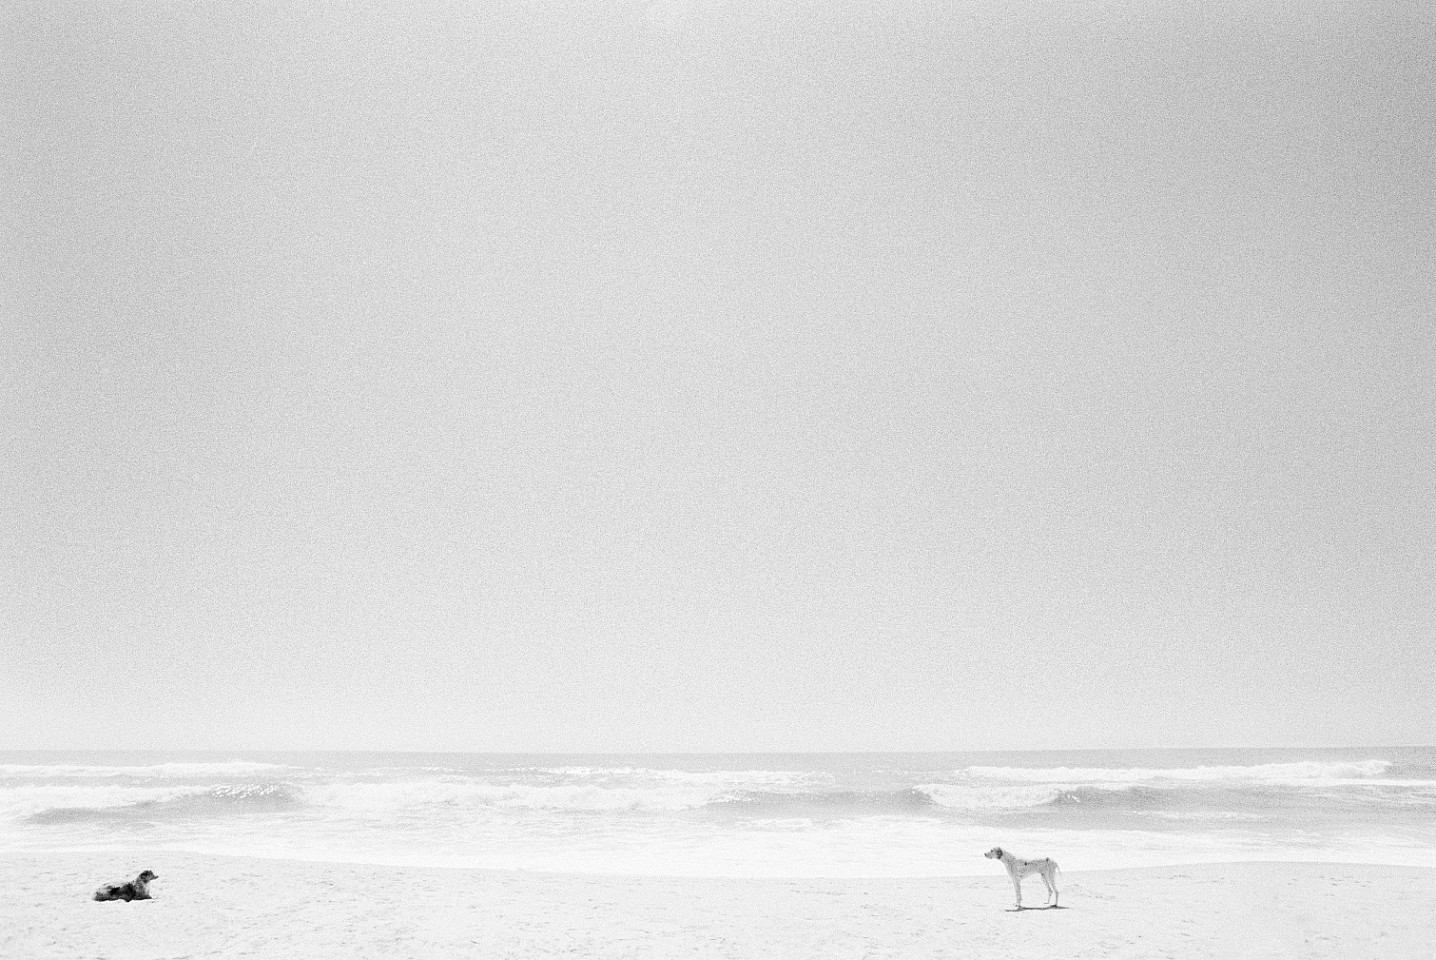 Christophe von Hohenberg, Two Dogs Social Distancing, Ed. 7/25
archival pigment print, 28 x 42 in.
CVH220204